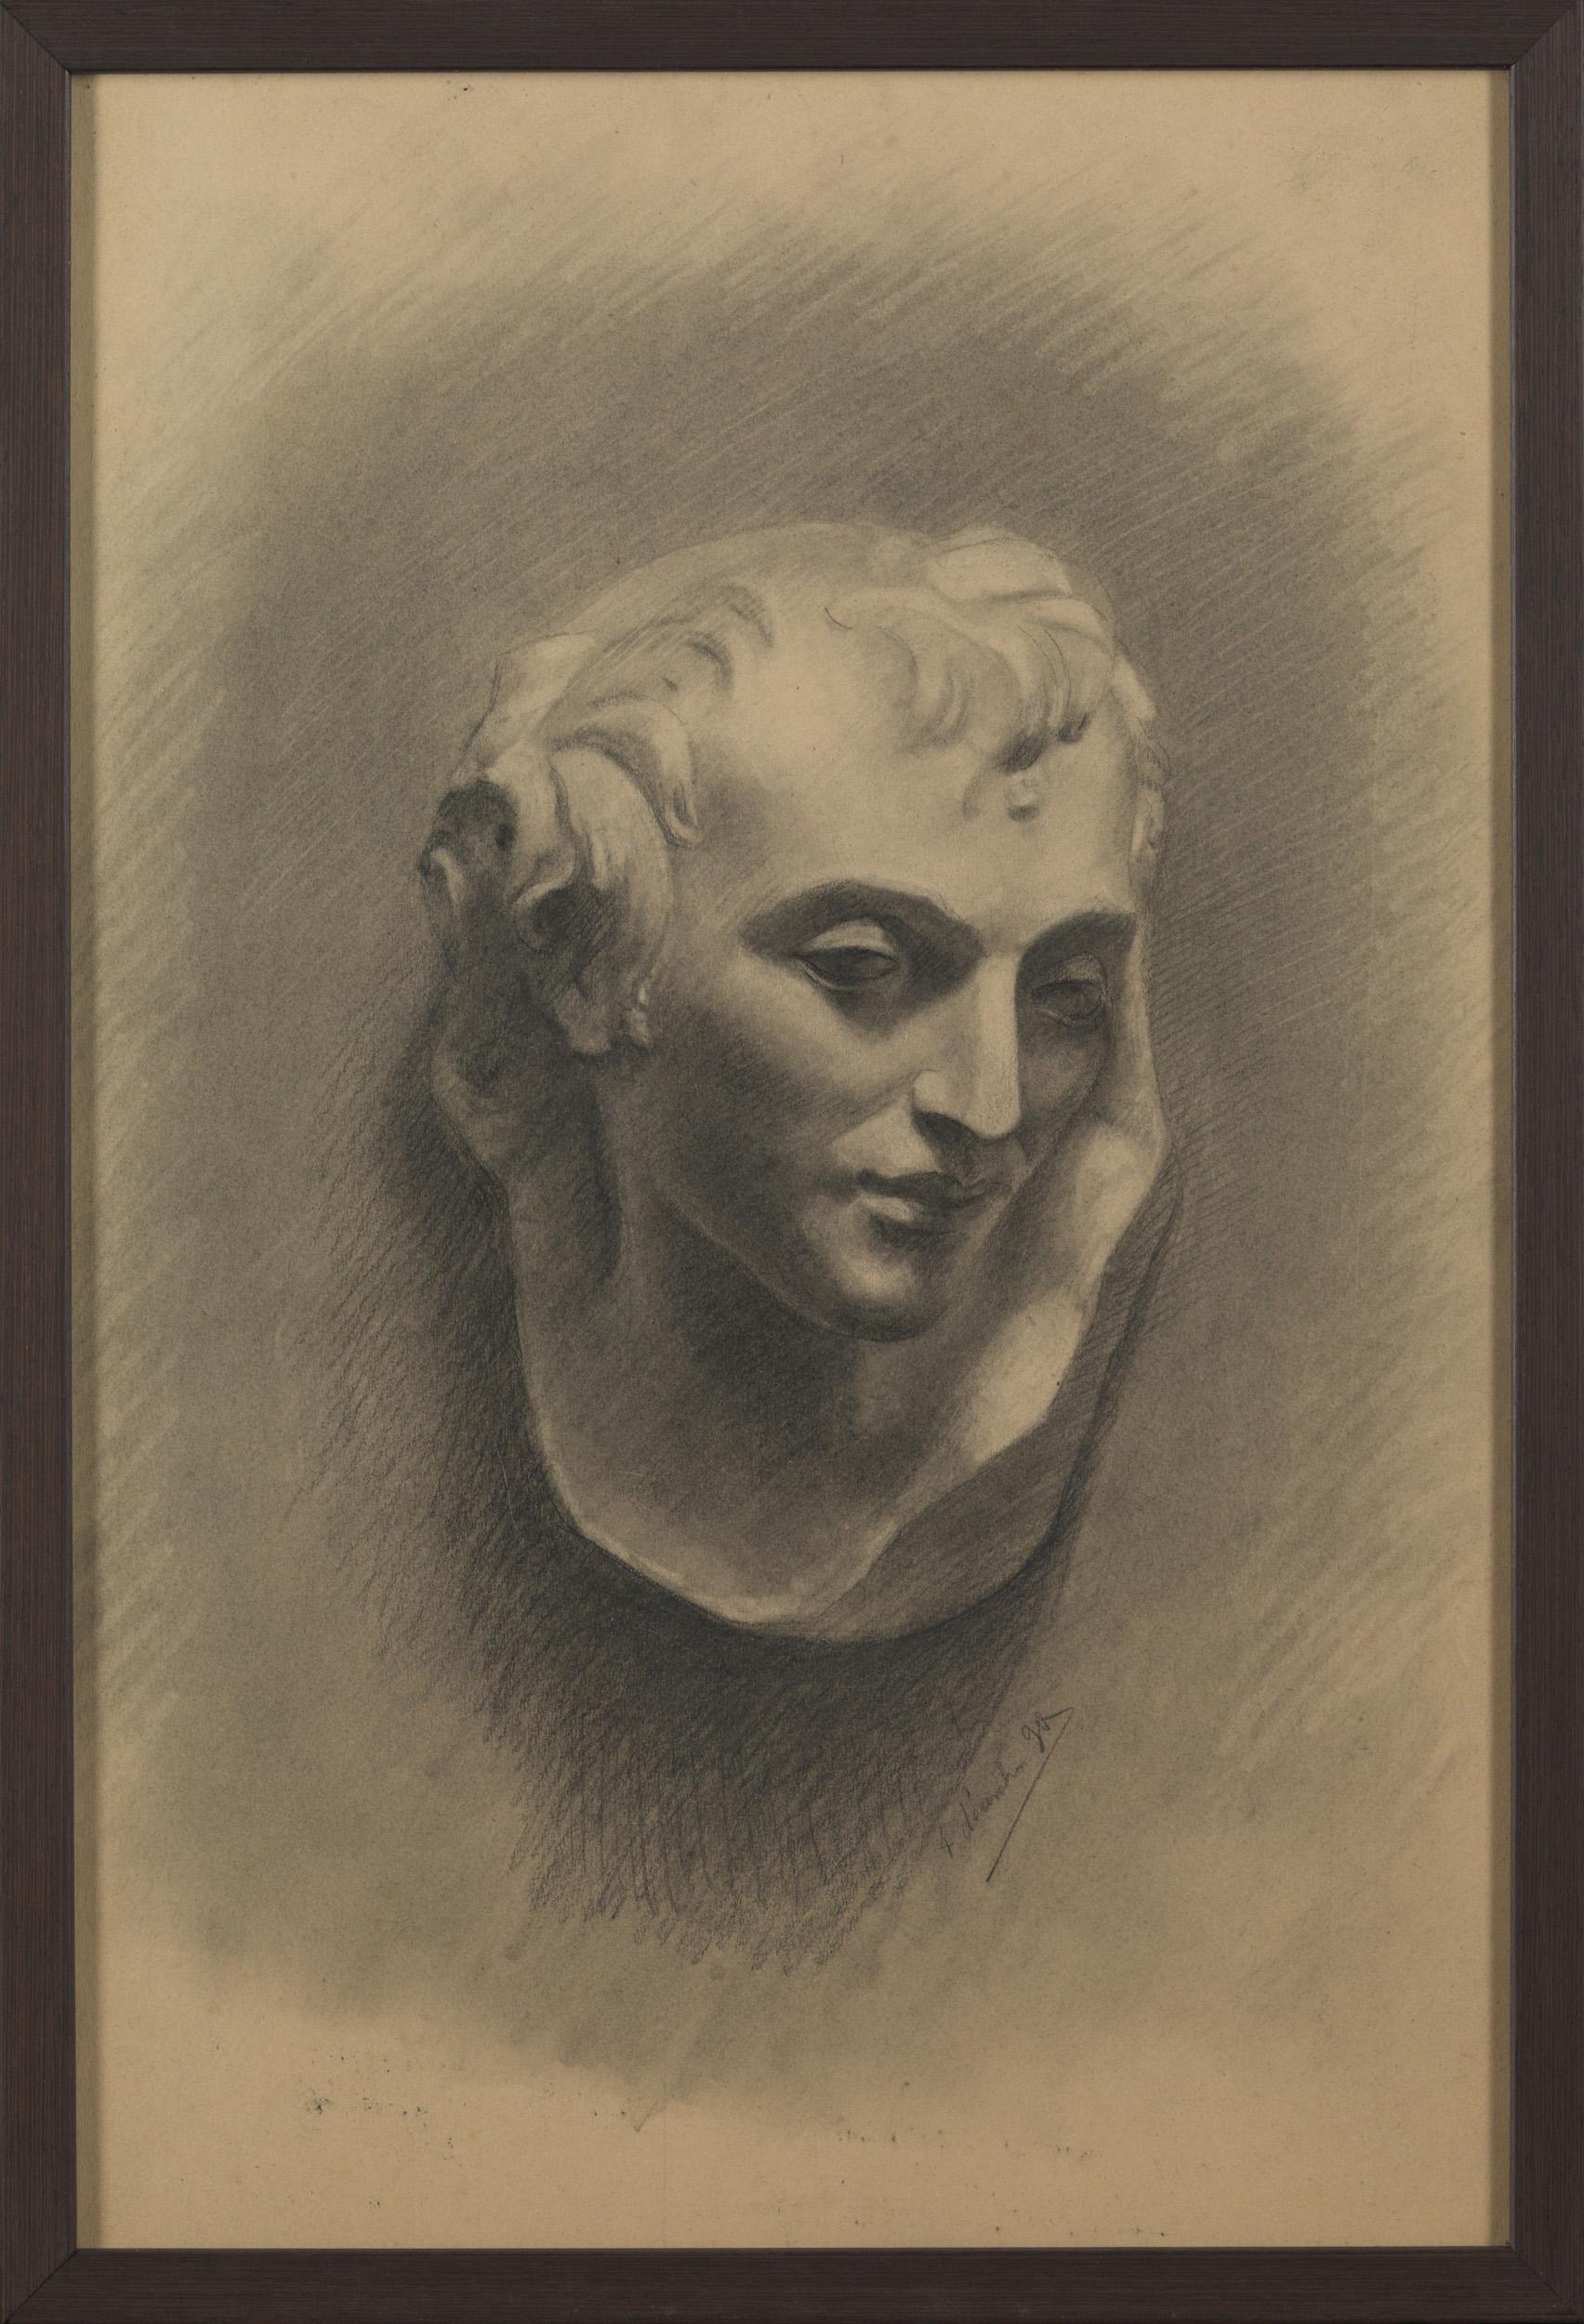 Unknown Academy Student 19th C Drawing, pencil on paper, framed and signed.